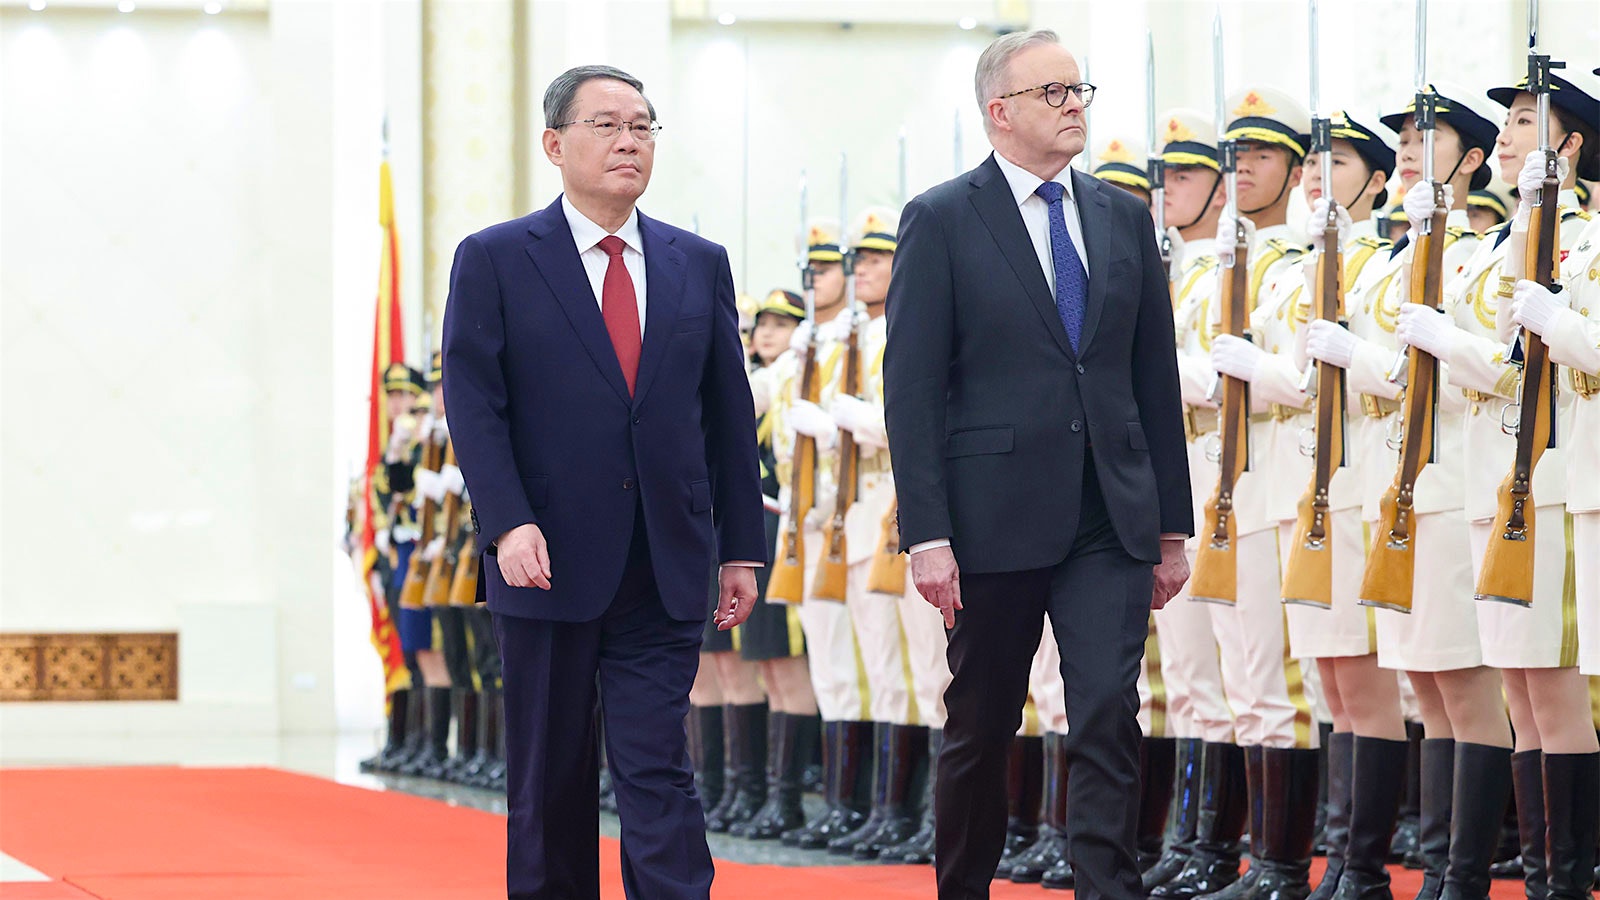  Chinese Premier Li Qiang and Australian Prime Minister Anthony Albanese walk in the Great Hall of the People in Beijing.